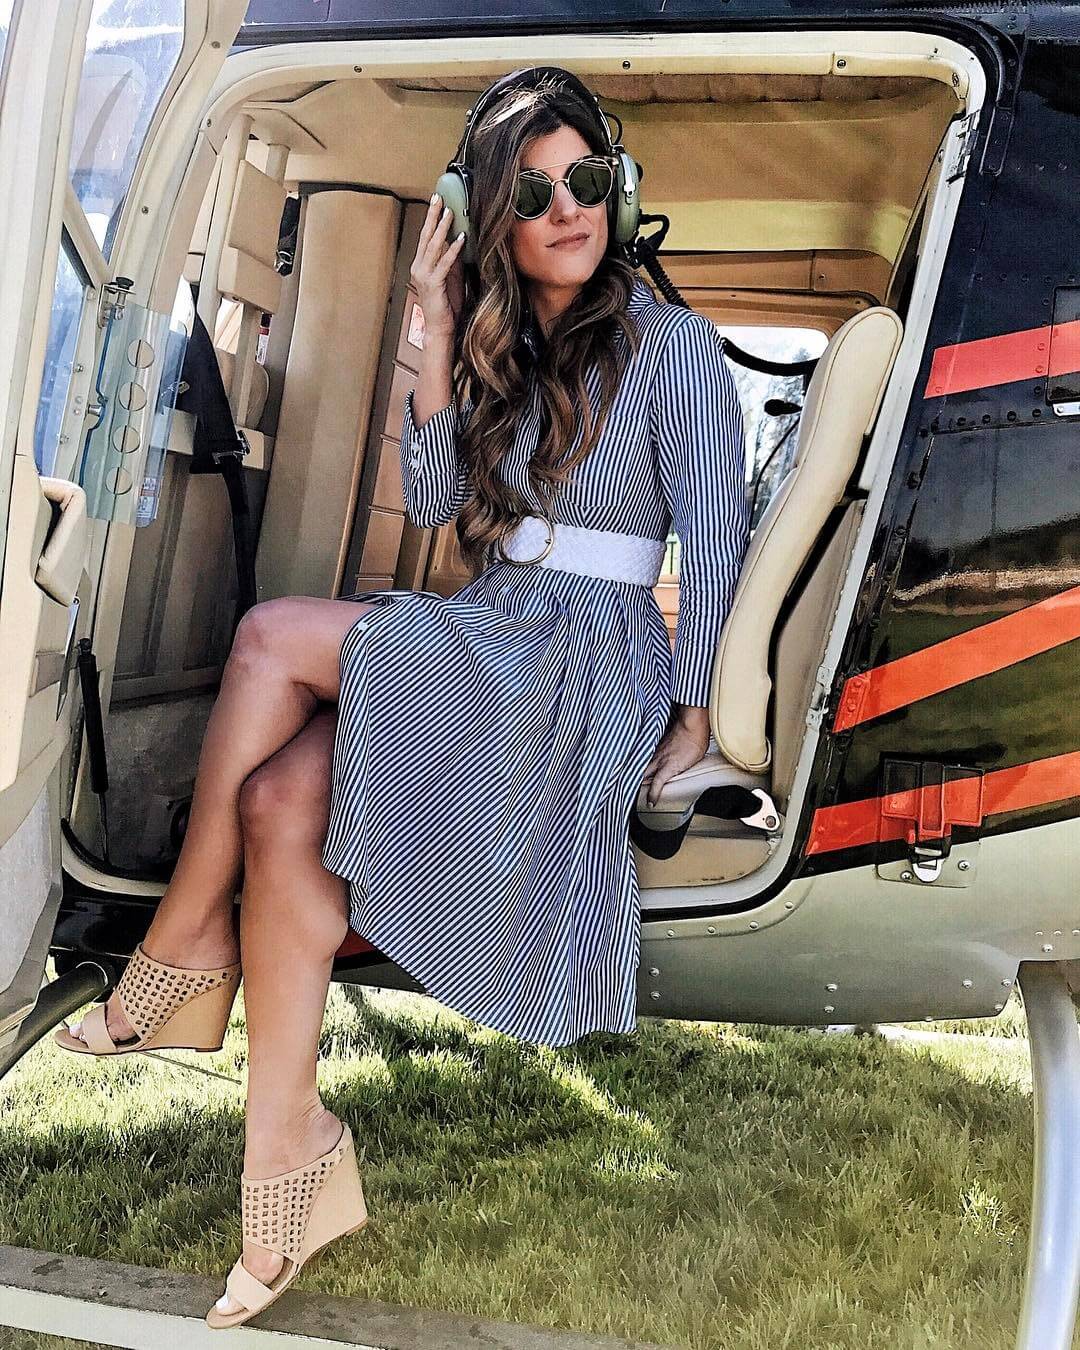 brighten keller helicopter ride outfit wearing striped dress and white belt 